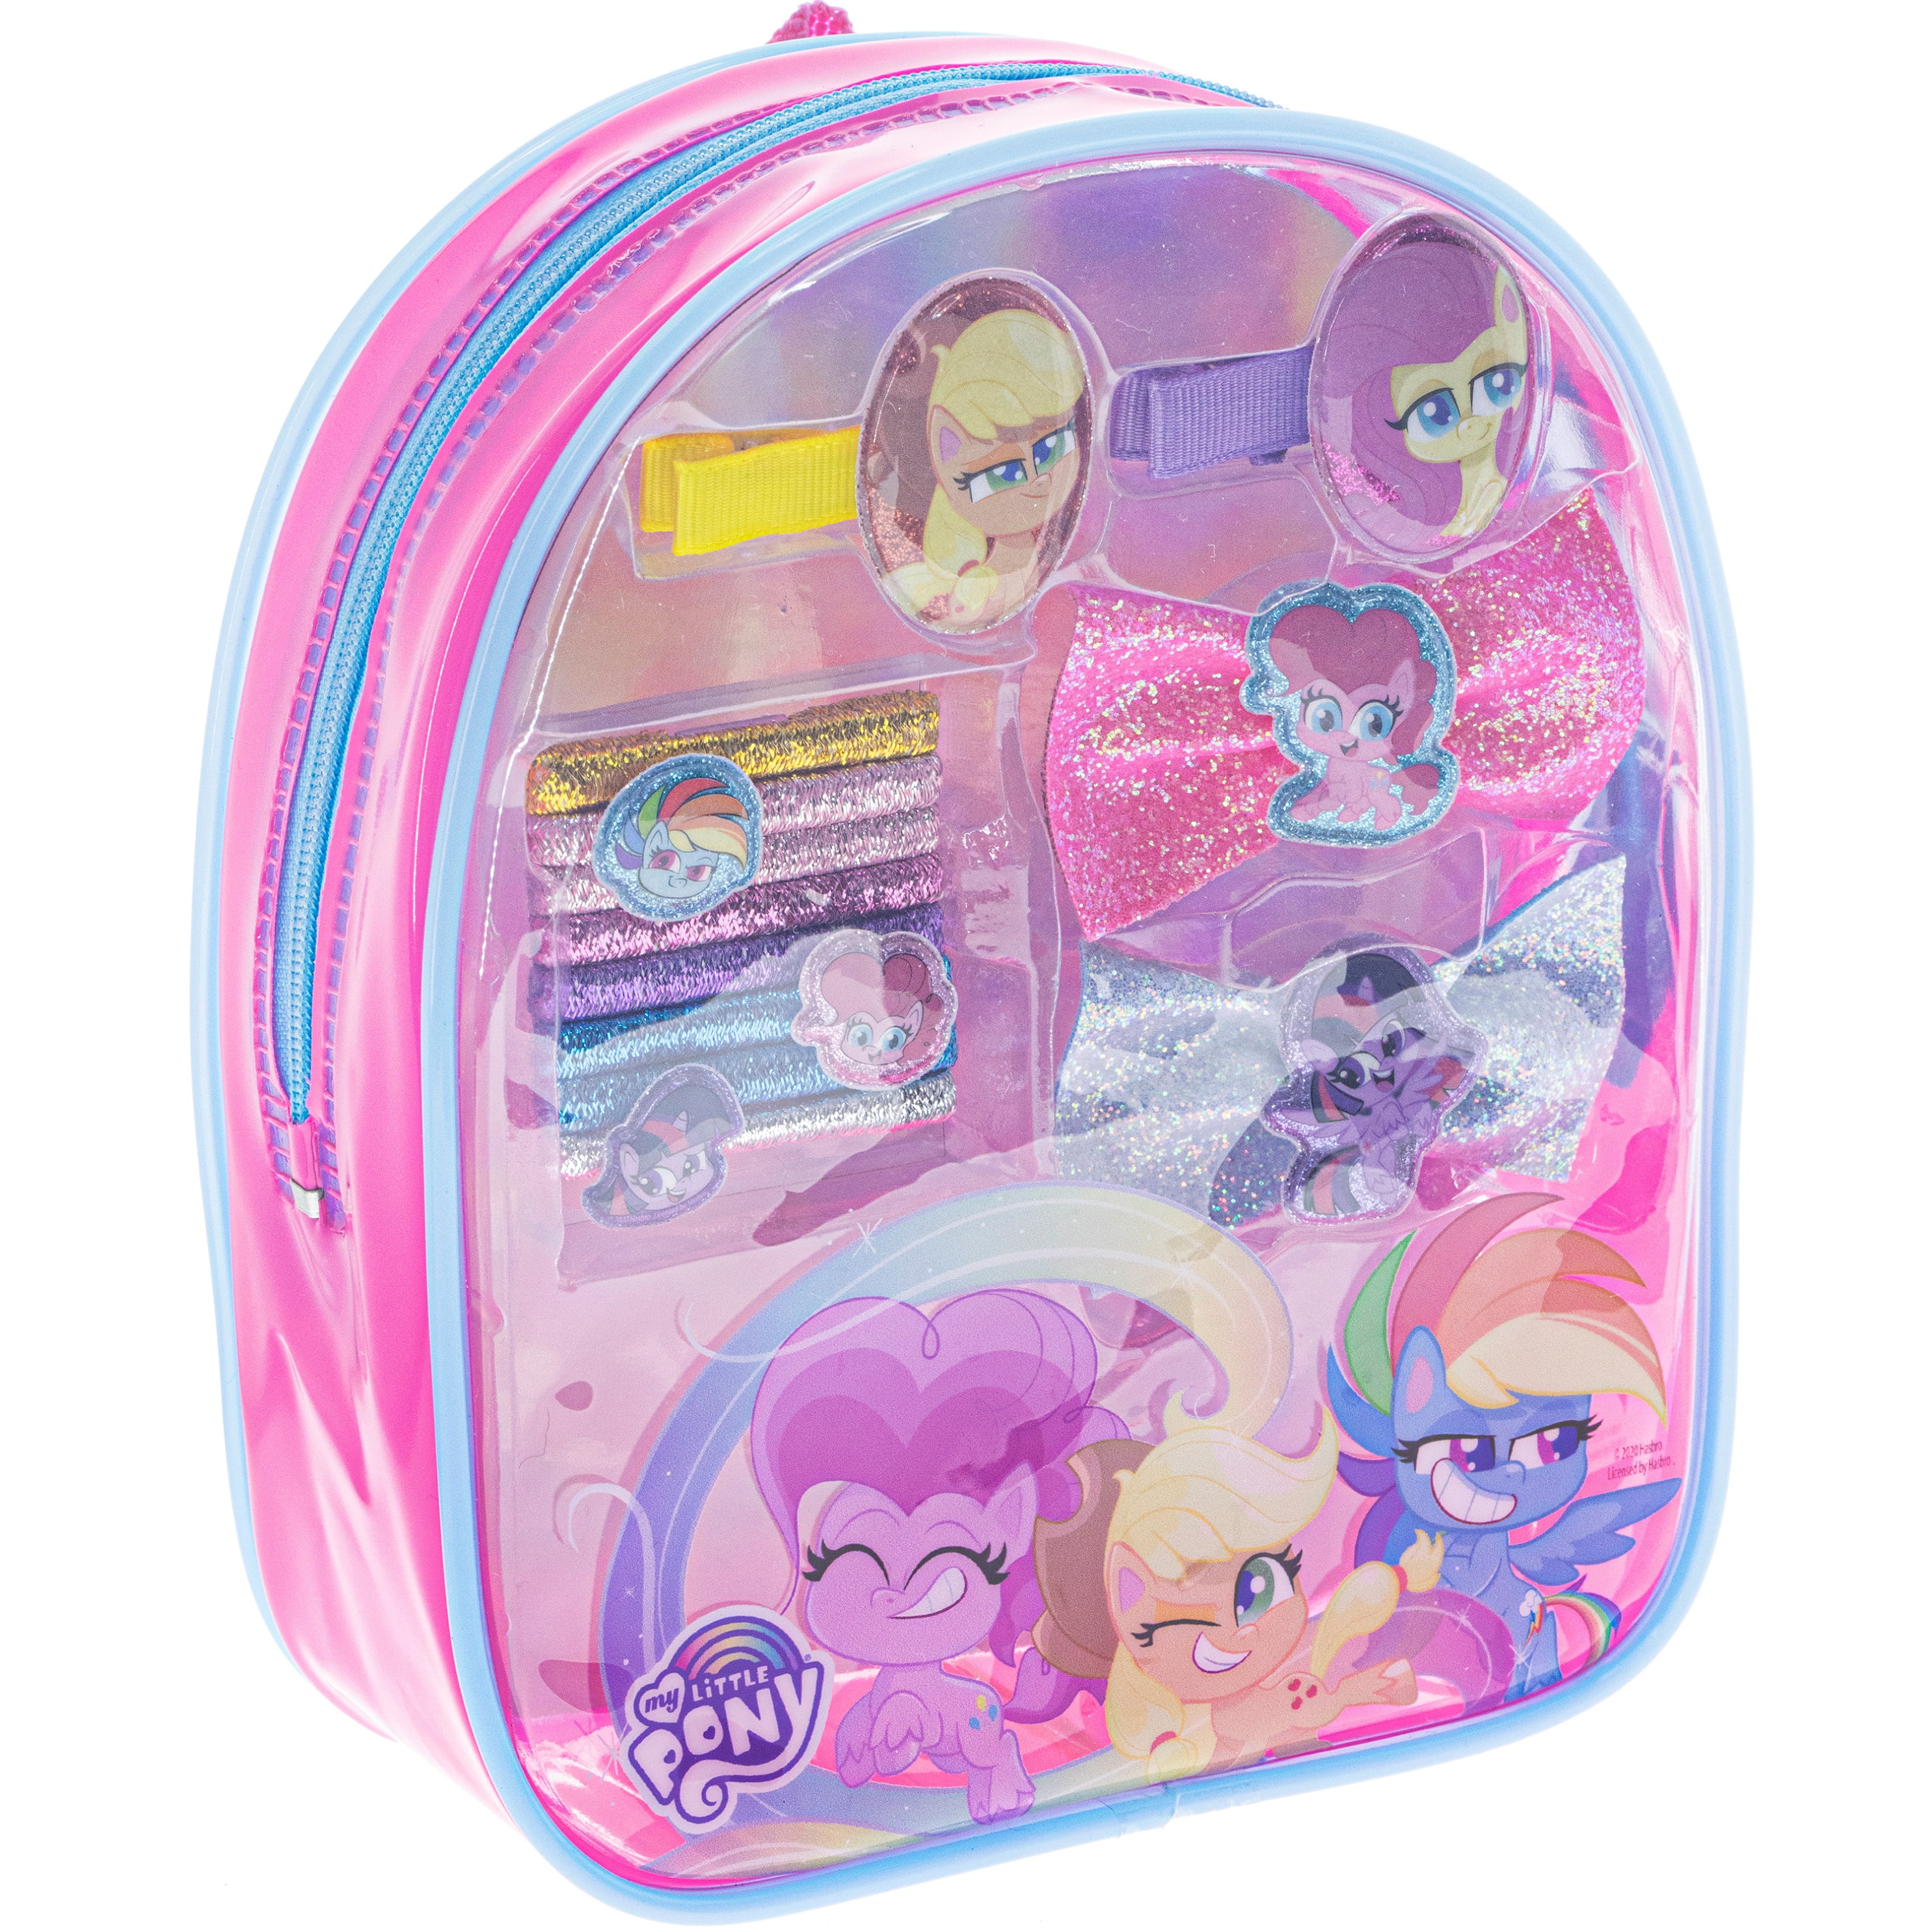 TownleyGirl - Townley Girl My Little Pony Miniature Bag with Hair ...